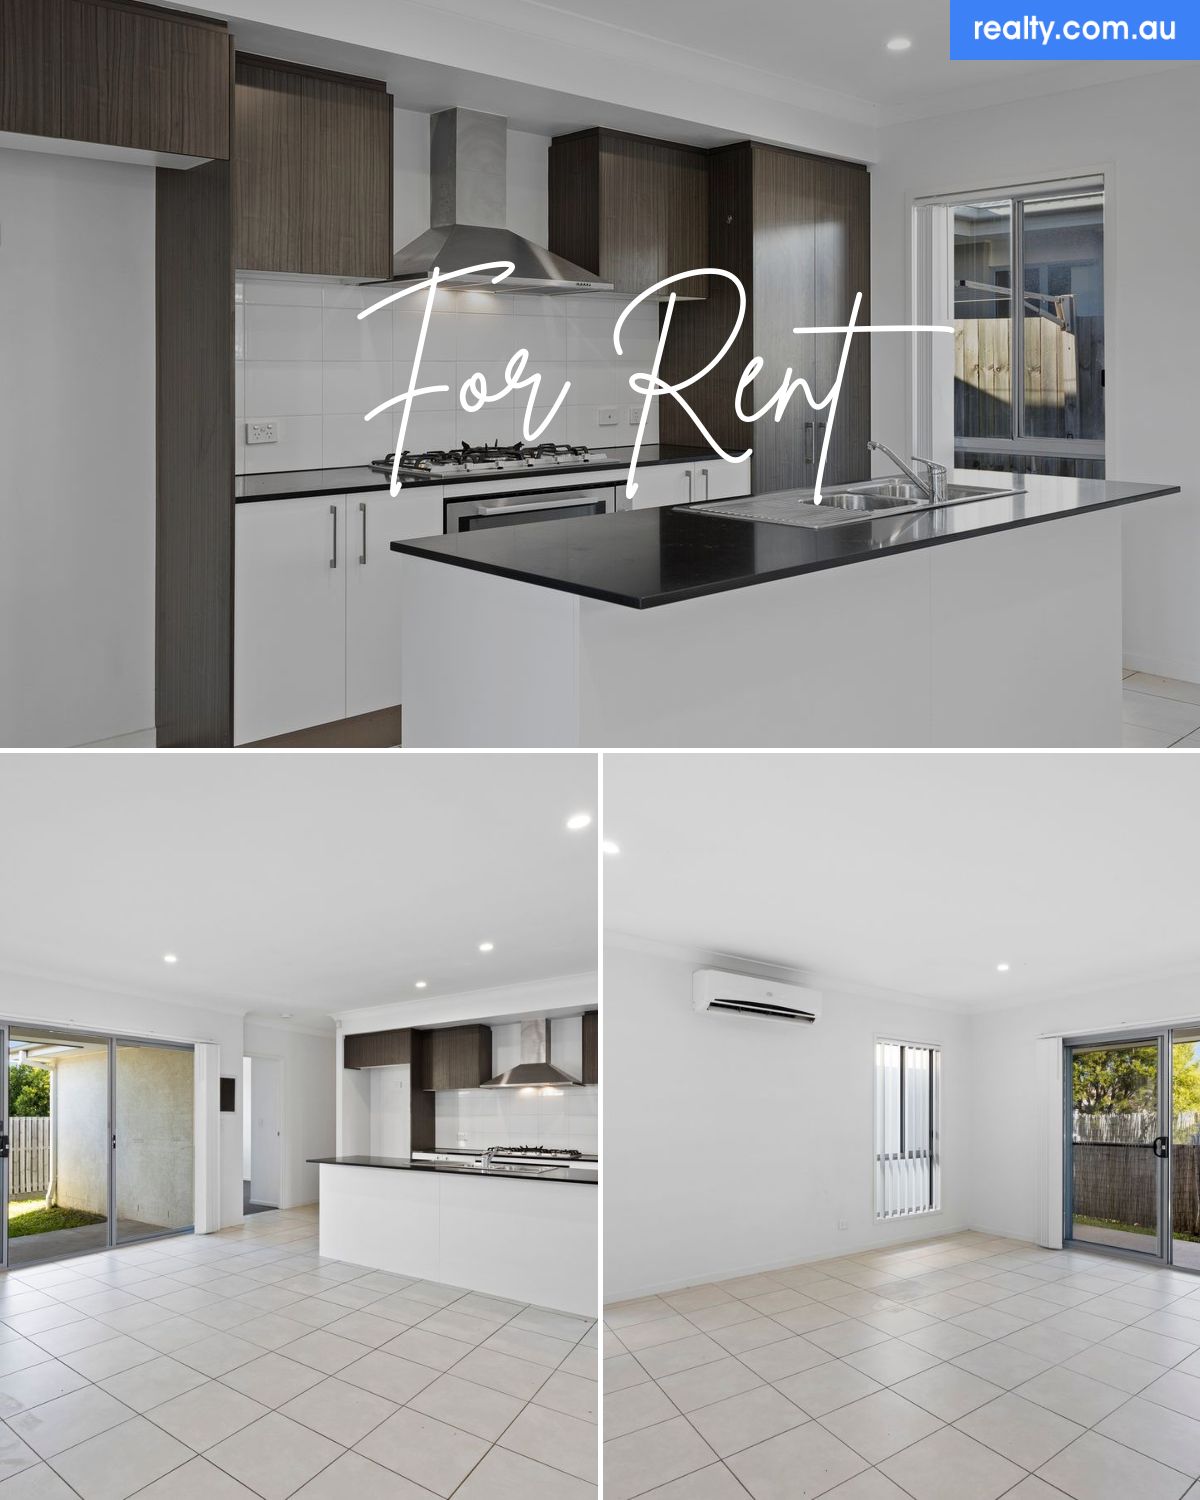 1 Palmerston Place, Coomera, QLD 4209 | Realty.com.au